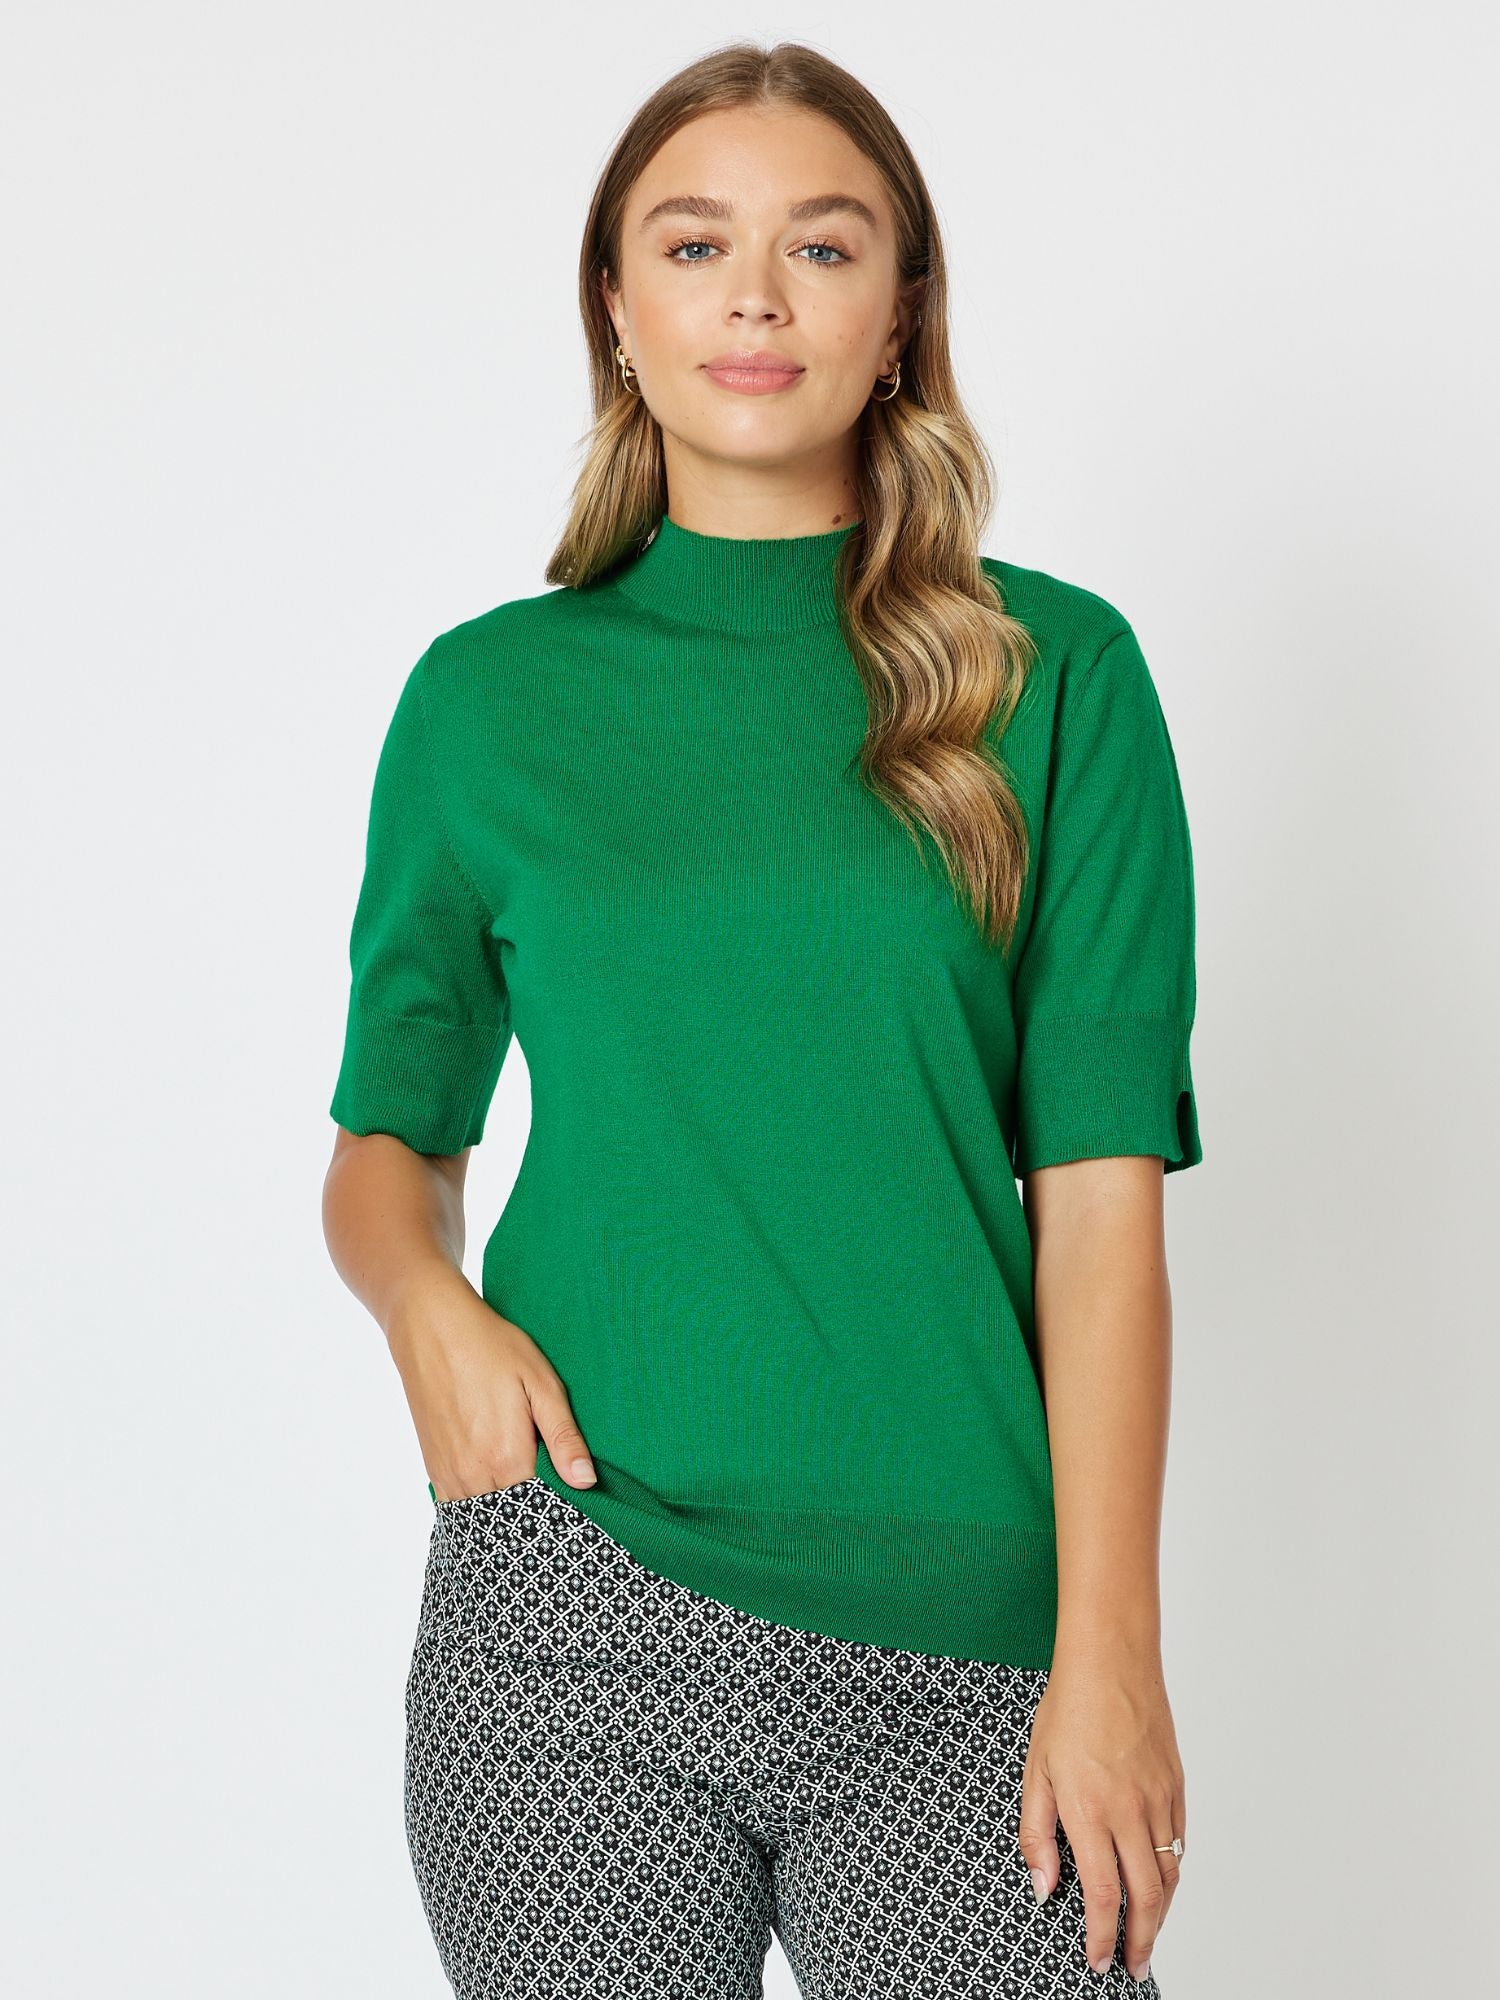 Donna High Neck Knit Top Top - Emerald